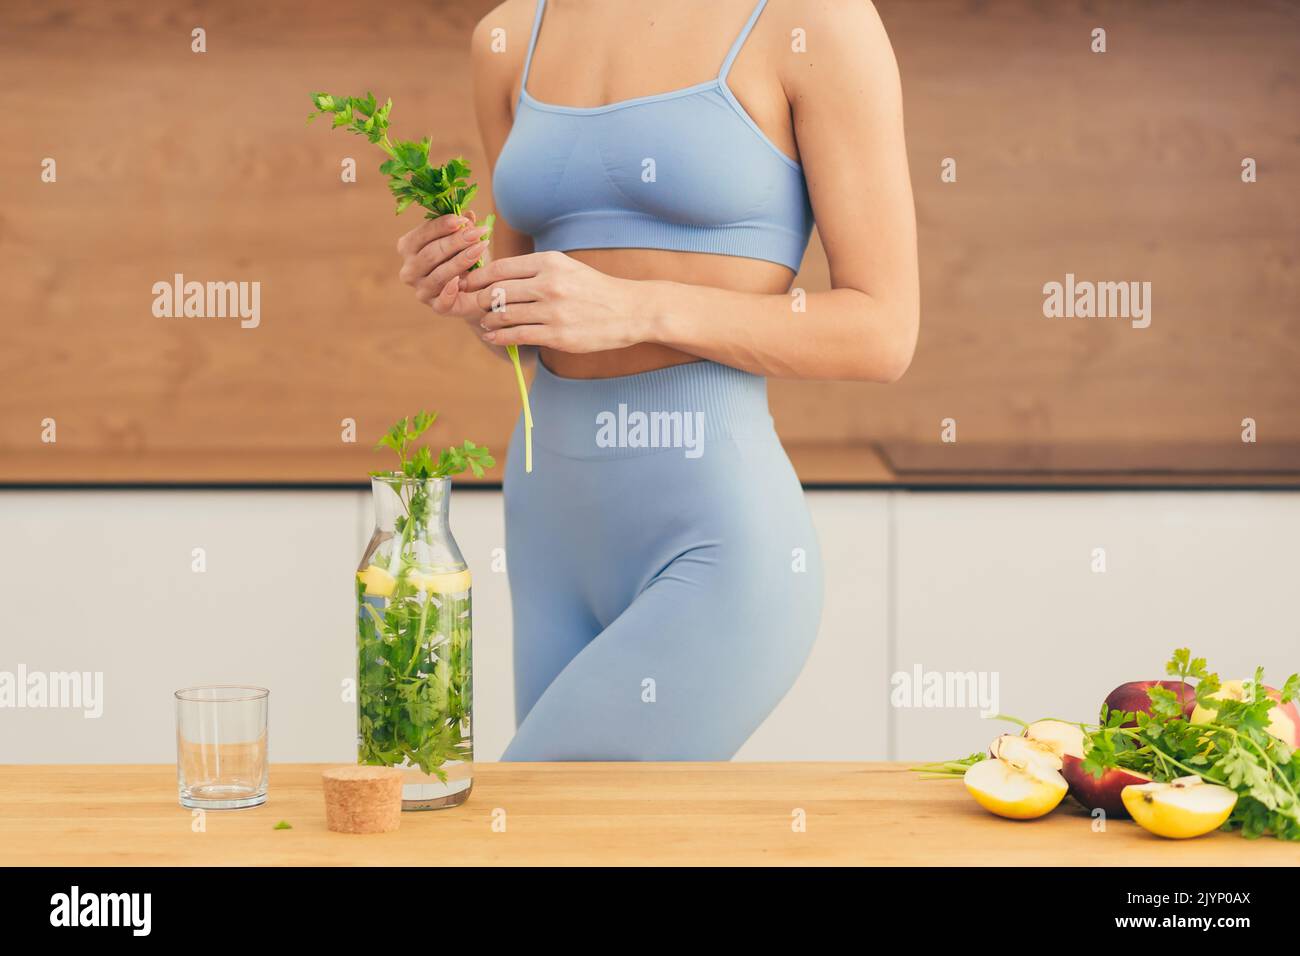 Close up photo, body part of young beautiful fitness woman preparing detox drink with fresh fruits, mint and lemon at home in the kitchen Stock Photo